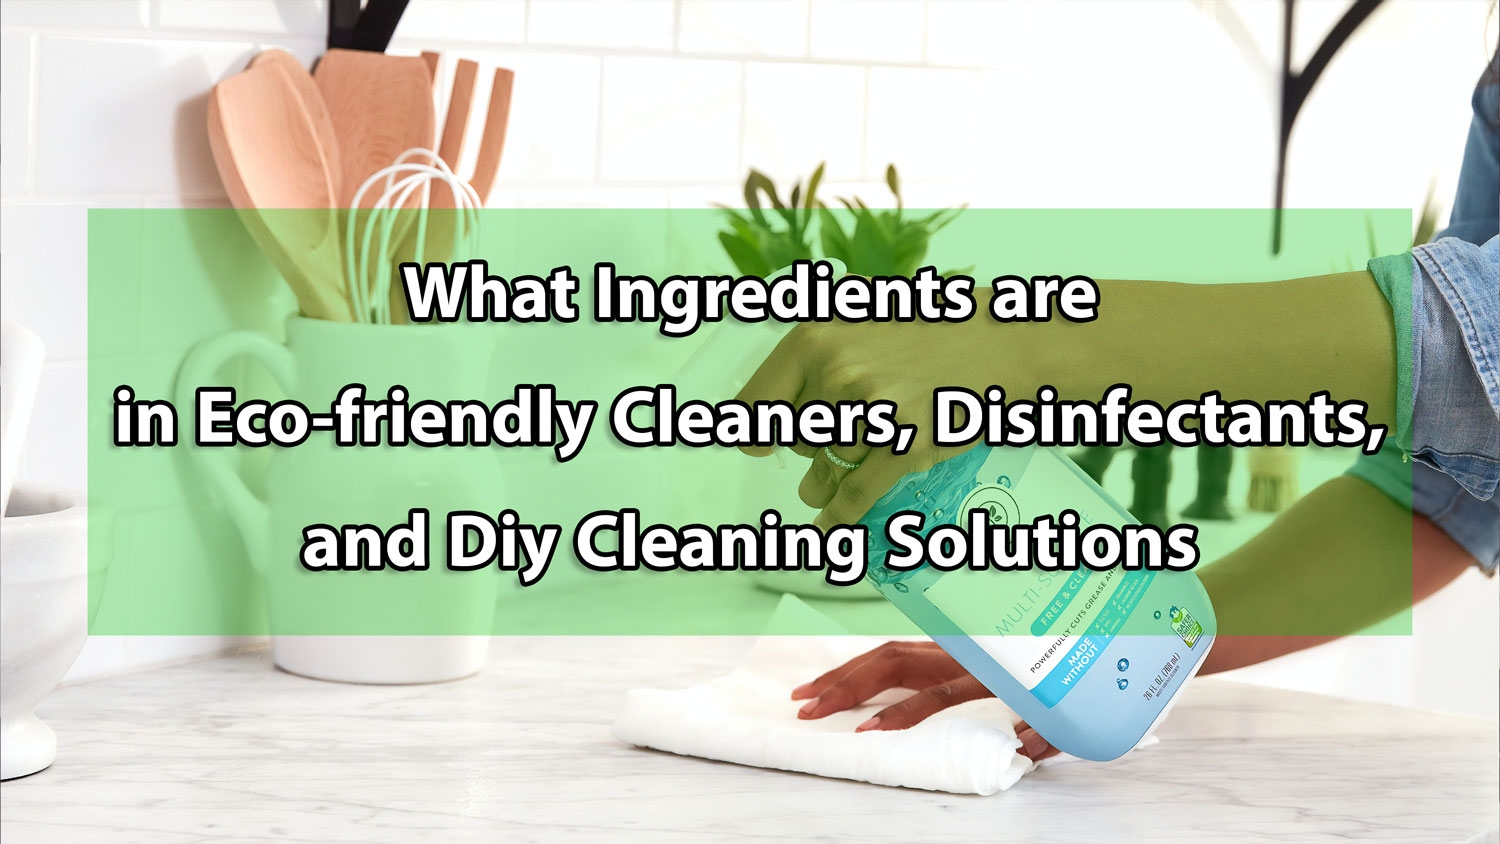 What Ingredients Are in Eco-Friendly Cleaners, Disinfectant, and DIY Cleaning Solutions